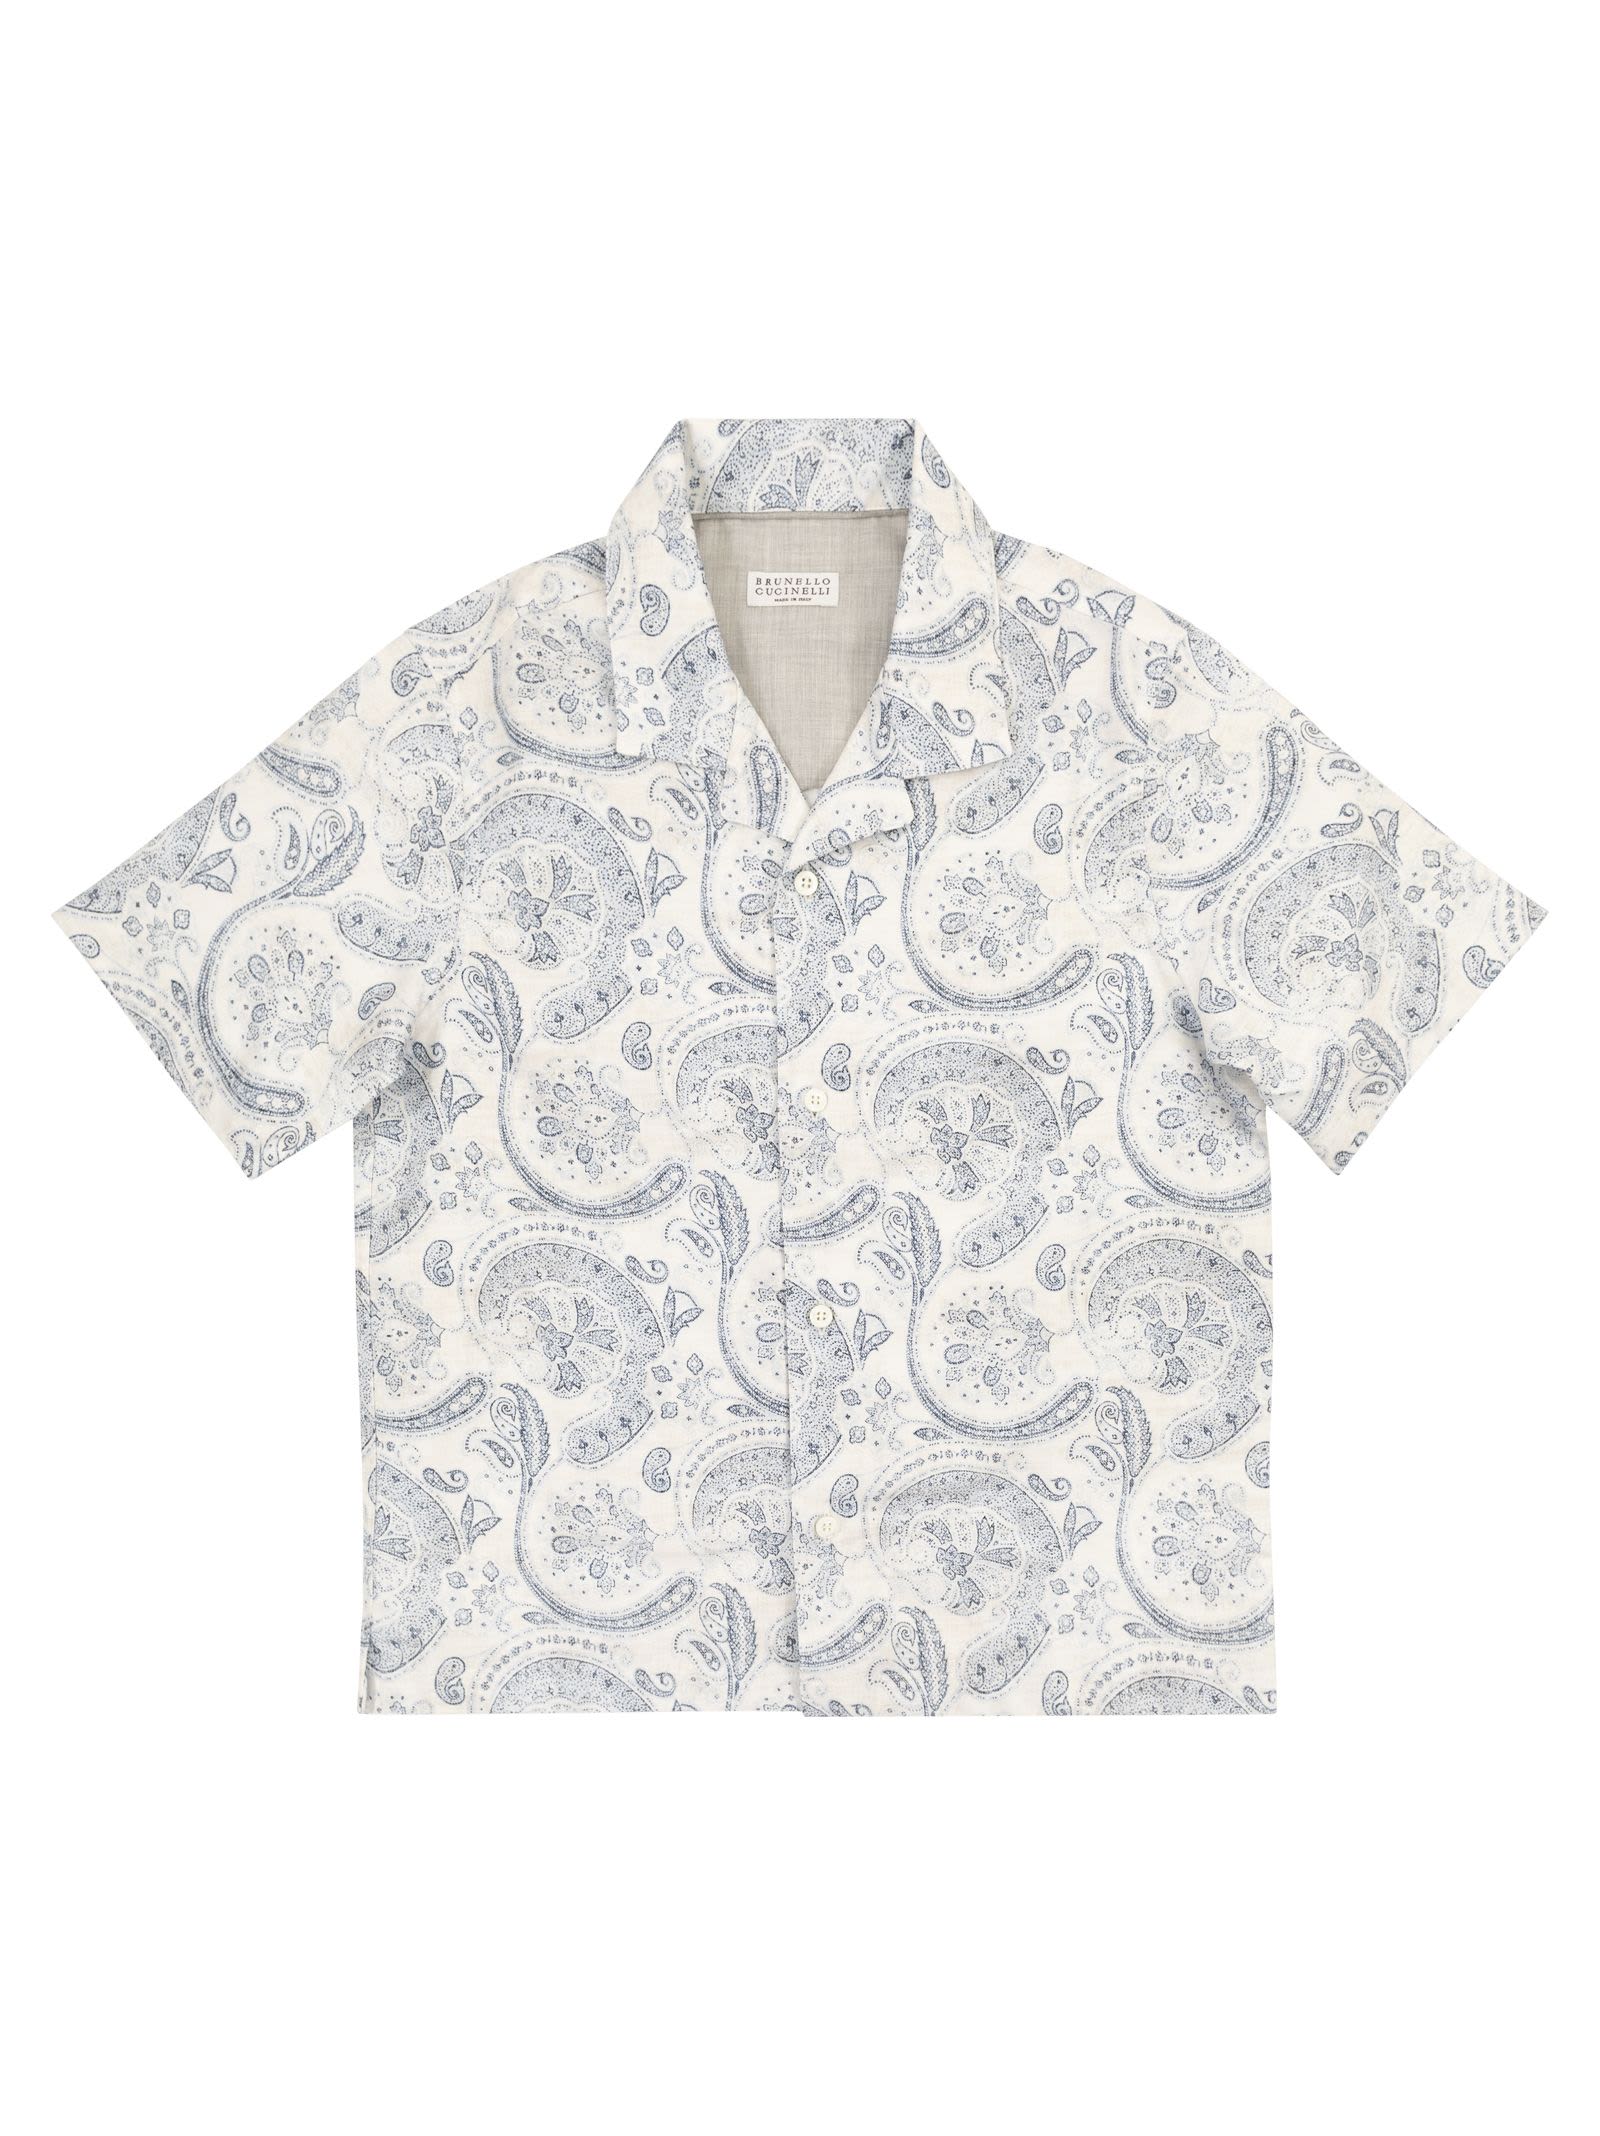 Brunello Cucinelli Kids' Paisley Print Linen Short-sleeved Shirt With Camp Collar In White/blue